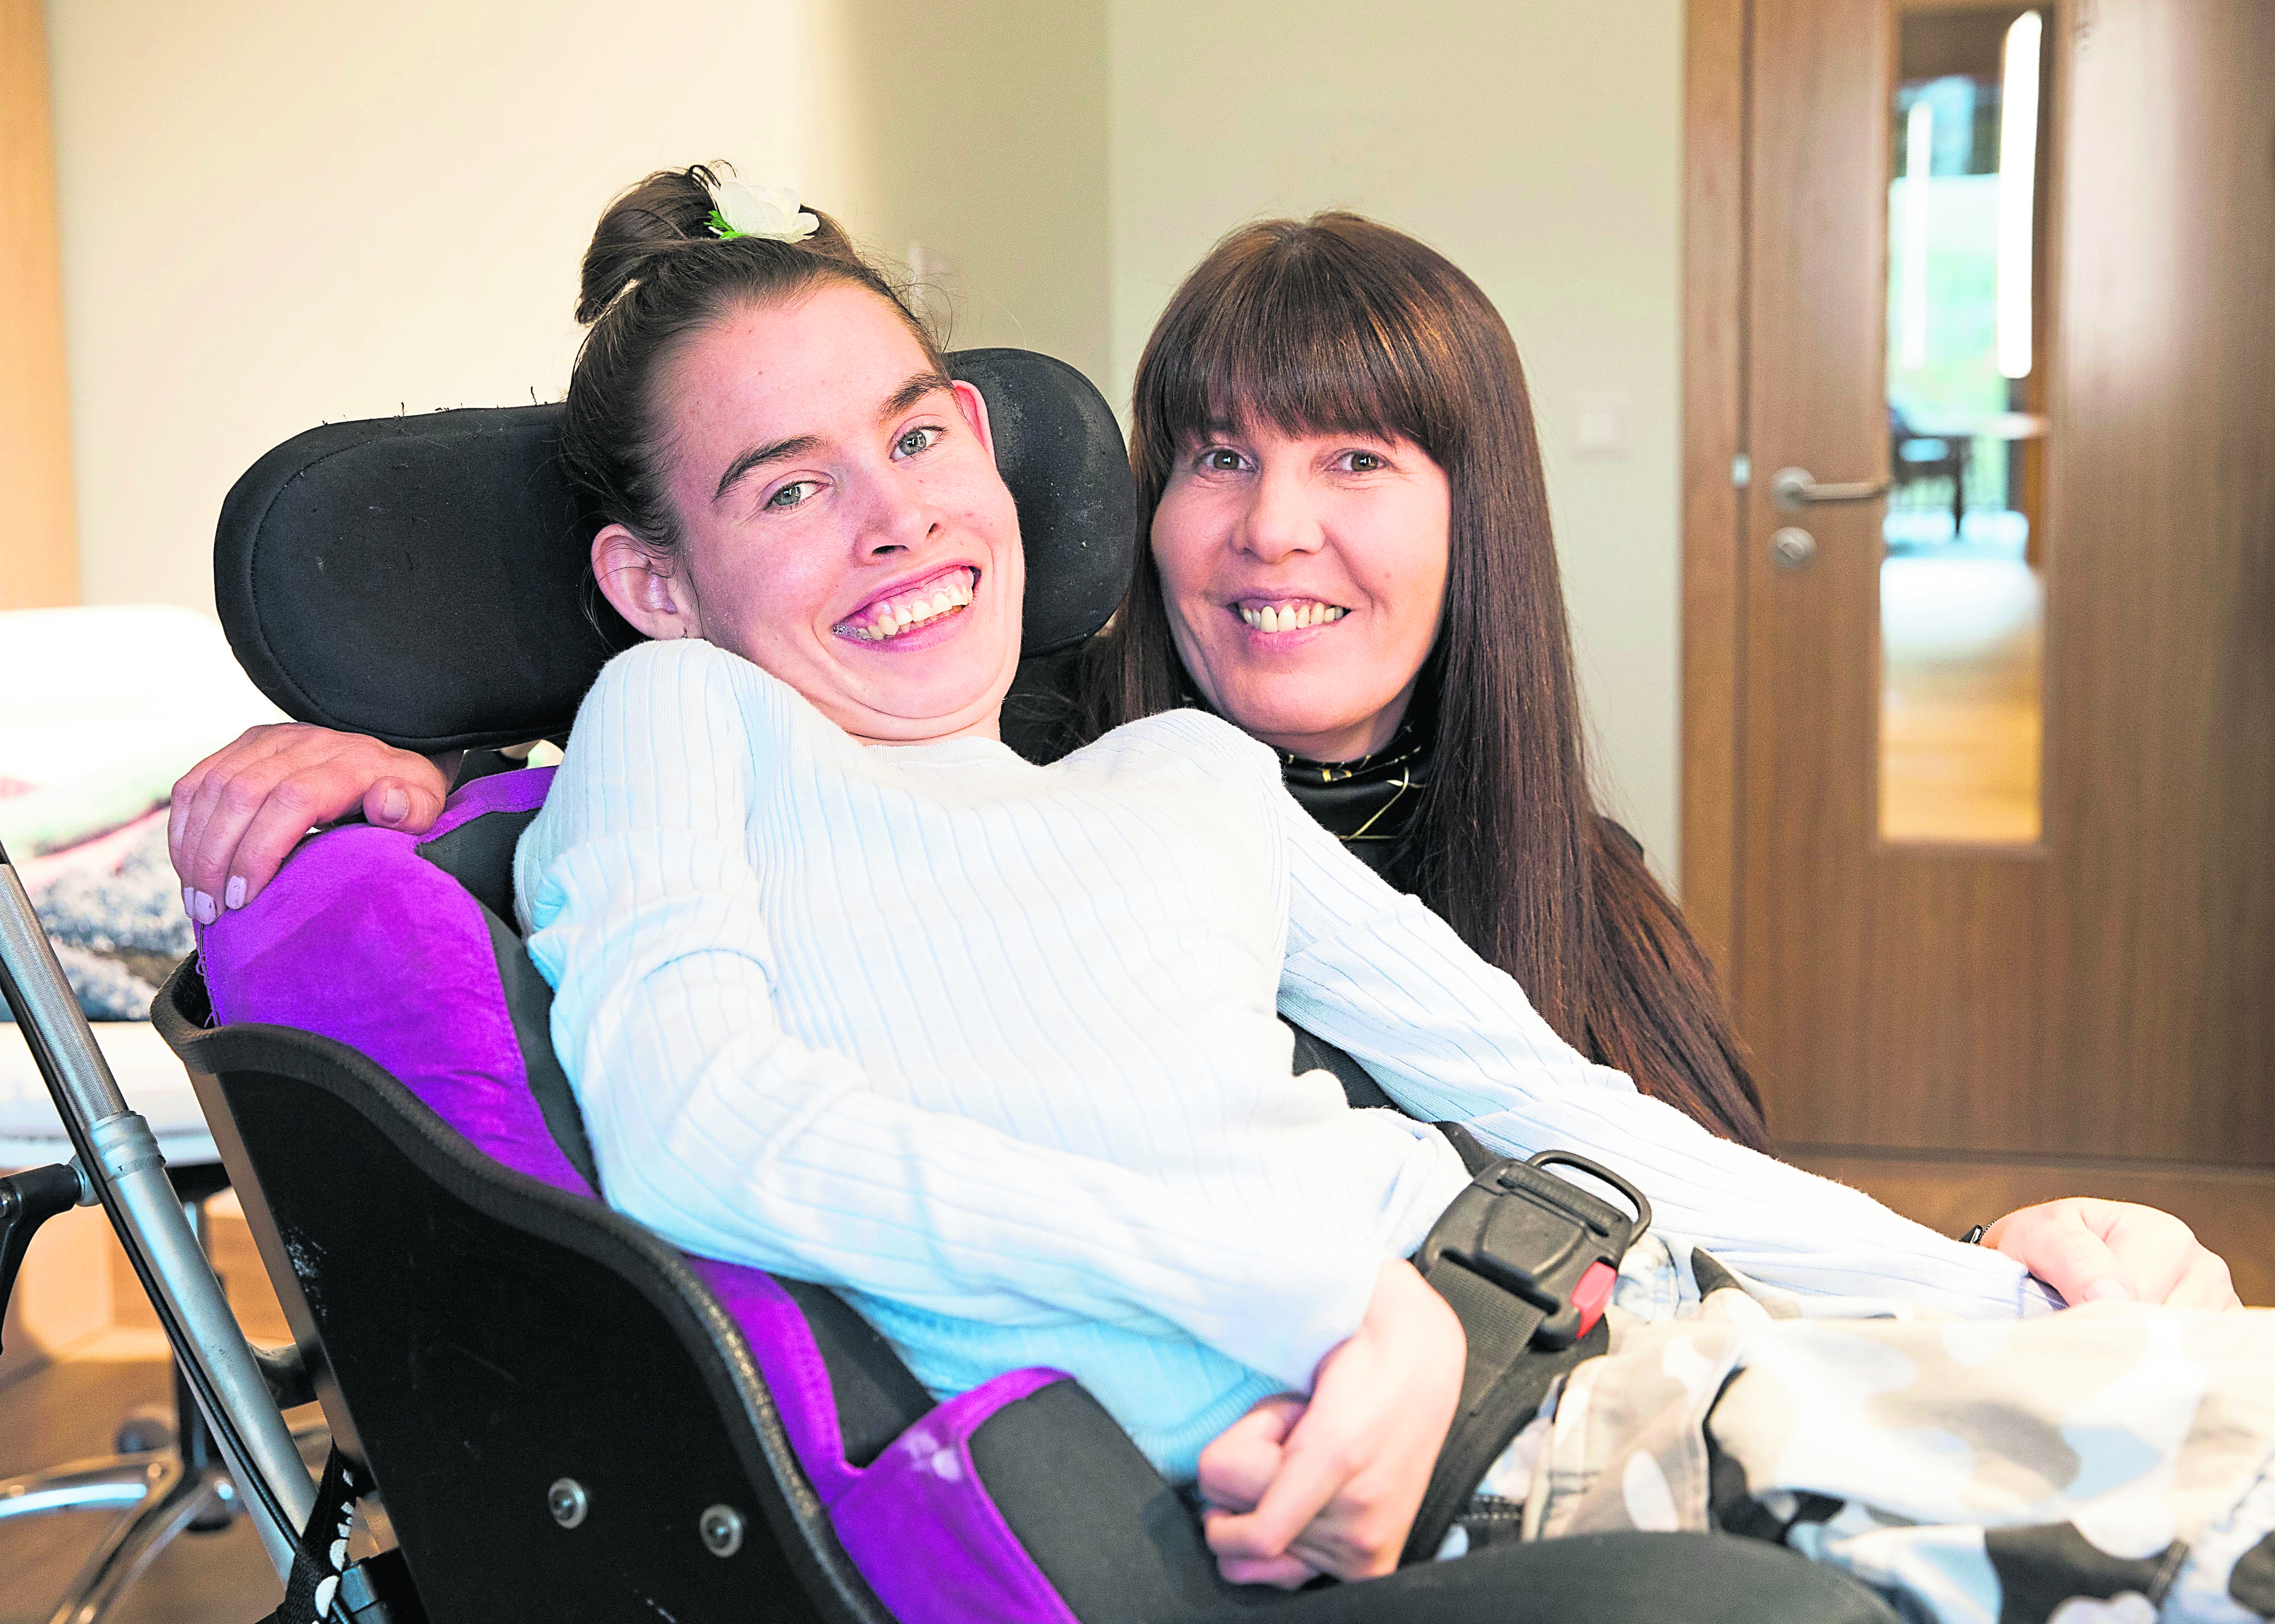 Leona Davidson with mum Angela, Leona has an extremely rare genetic neurological condition called Pantothenate Kinase-Associated Neurodegeneration (PKAN) Disease she attends the The Pamper Suite at Prince and Princess of Wales Hospice in Belahouston Park Glasgow.